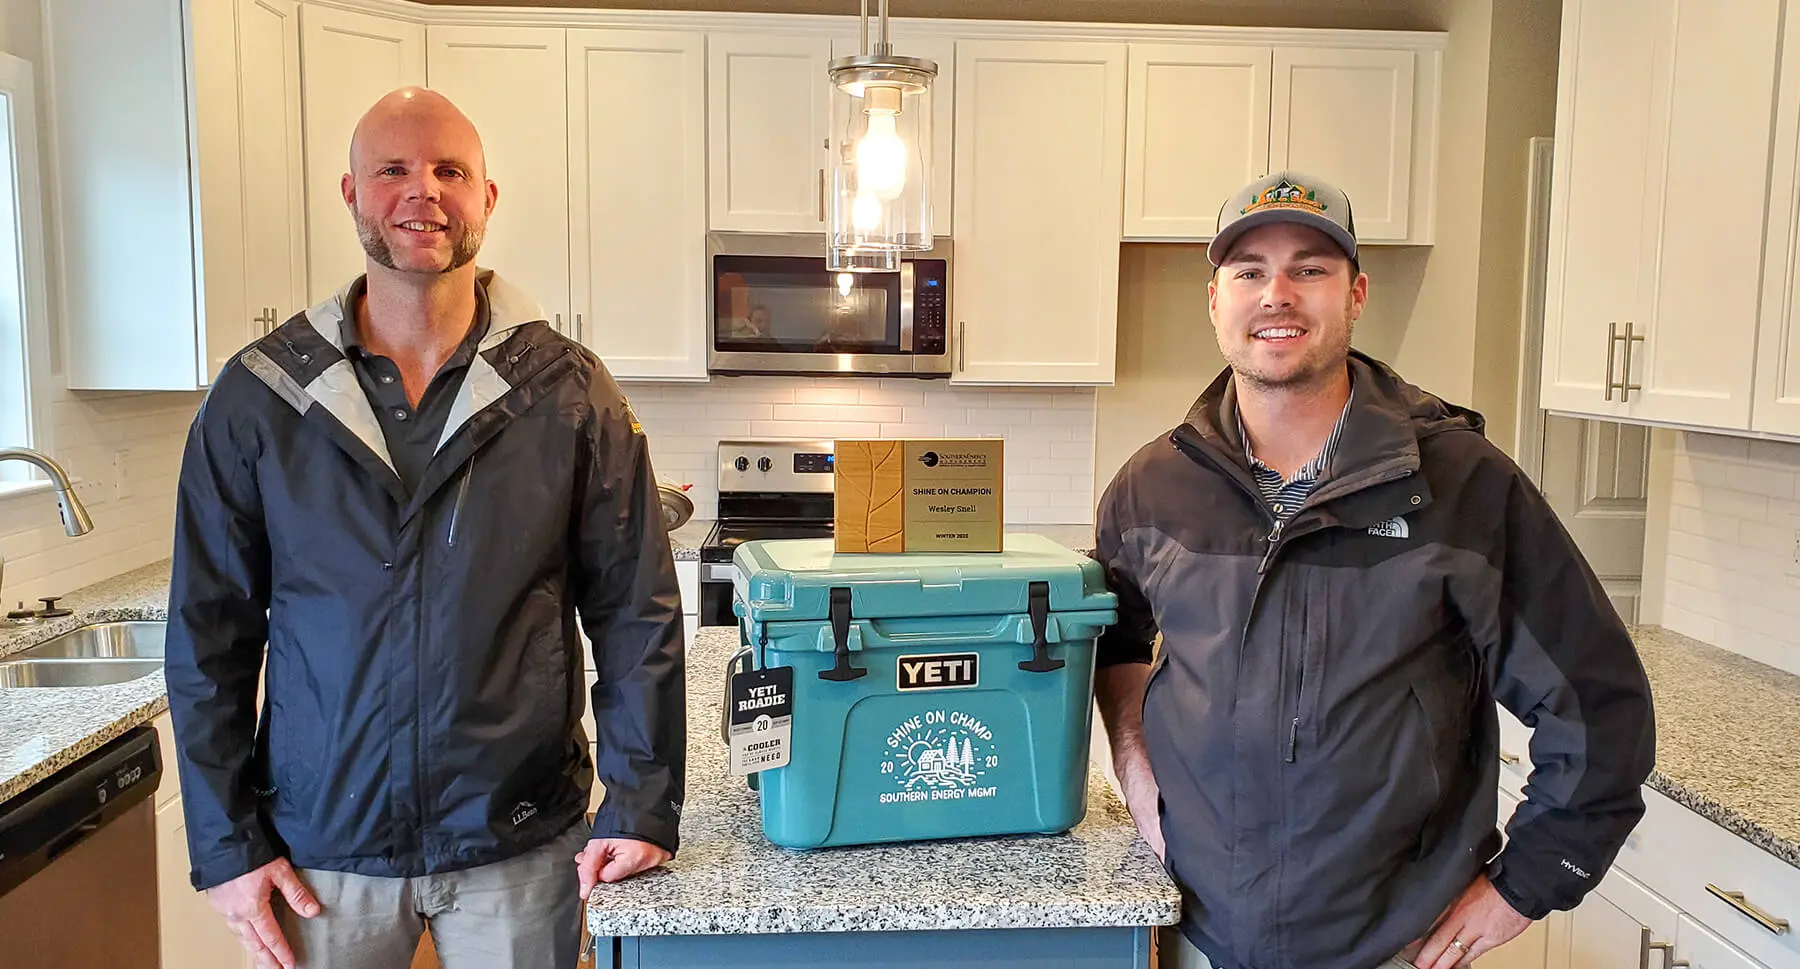 Wes Snell from Mattamy Homes, Winter Shine On Champ